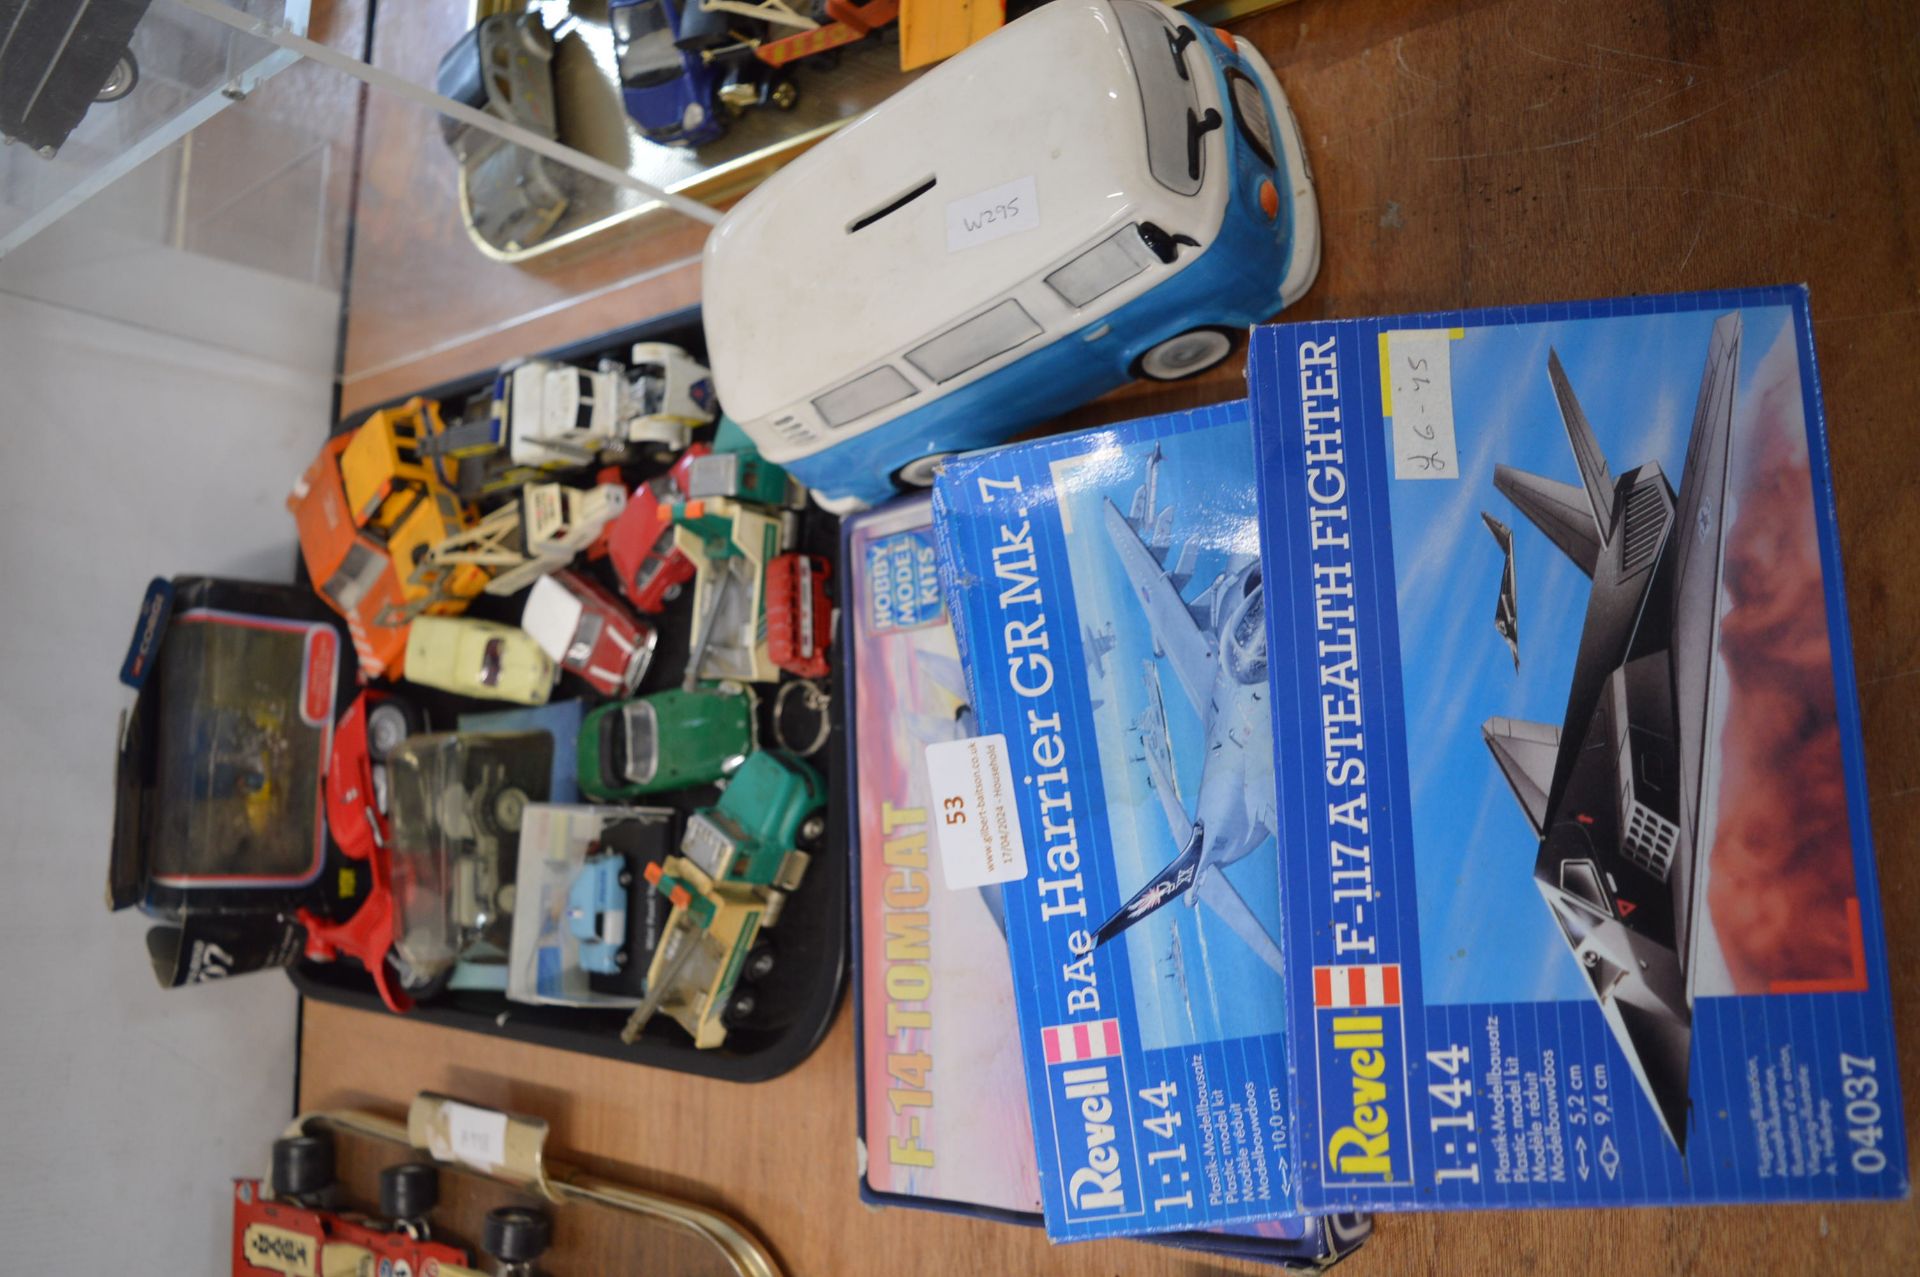 Diecast Vehicles, Model Airplane Kits, and a Money